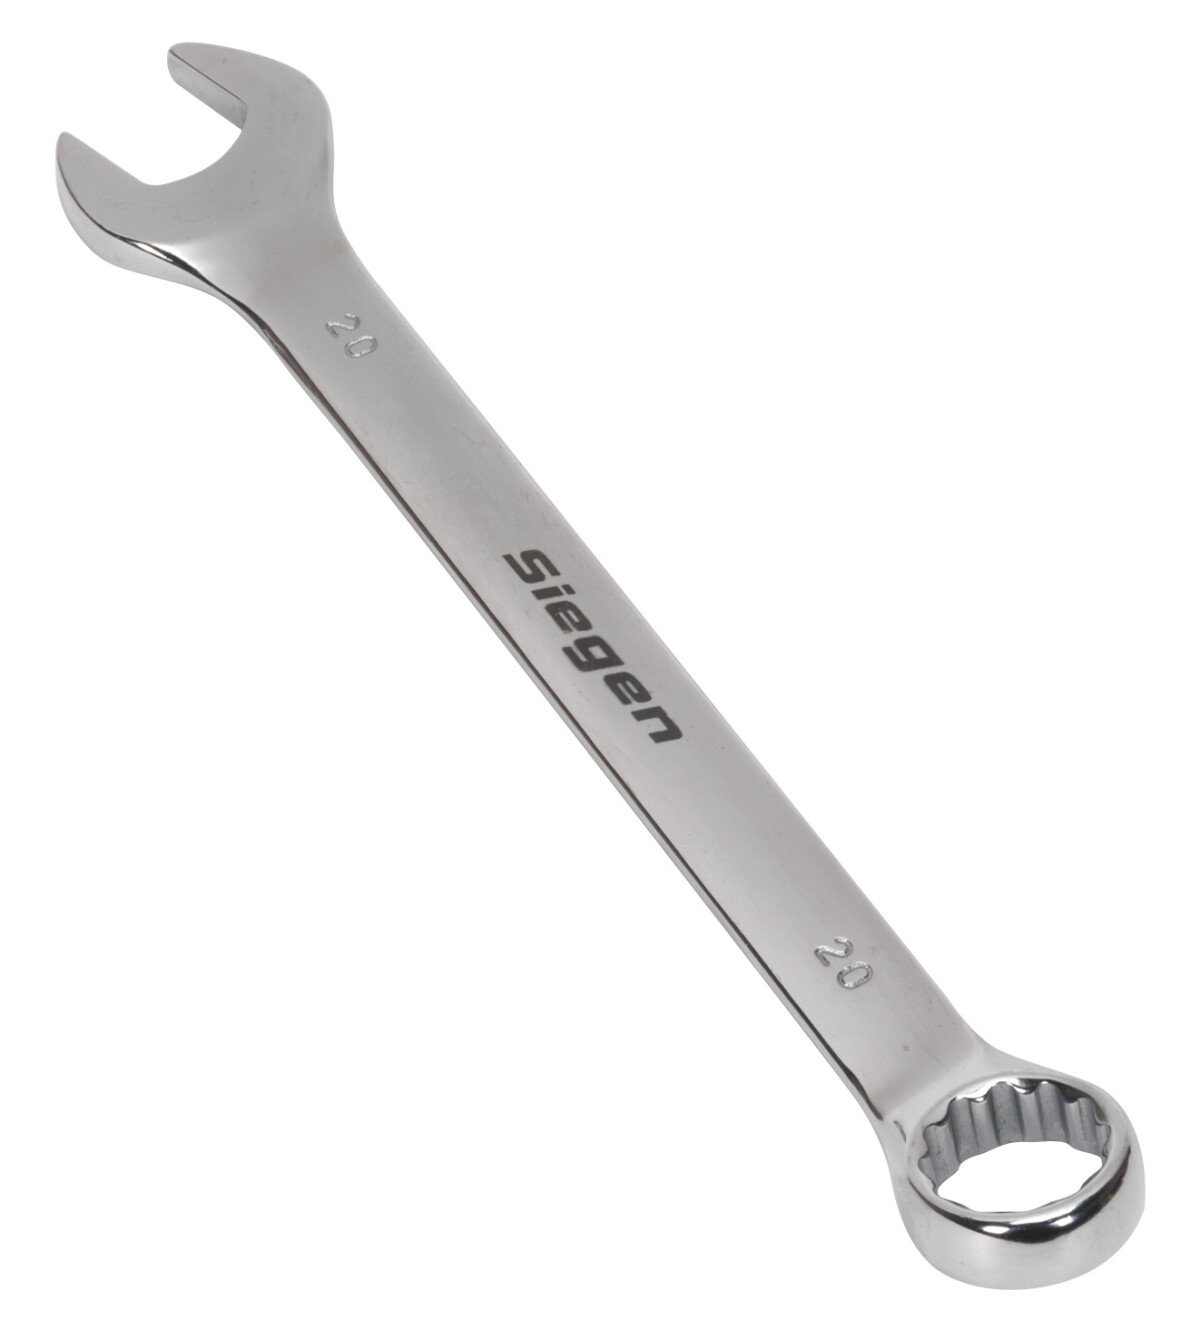 Sealey S01020 Combination Spanner 20mm